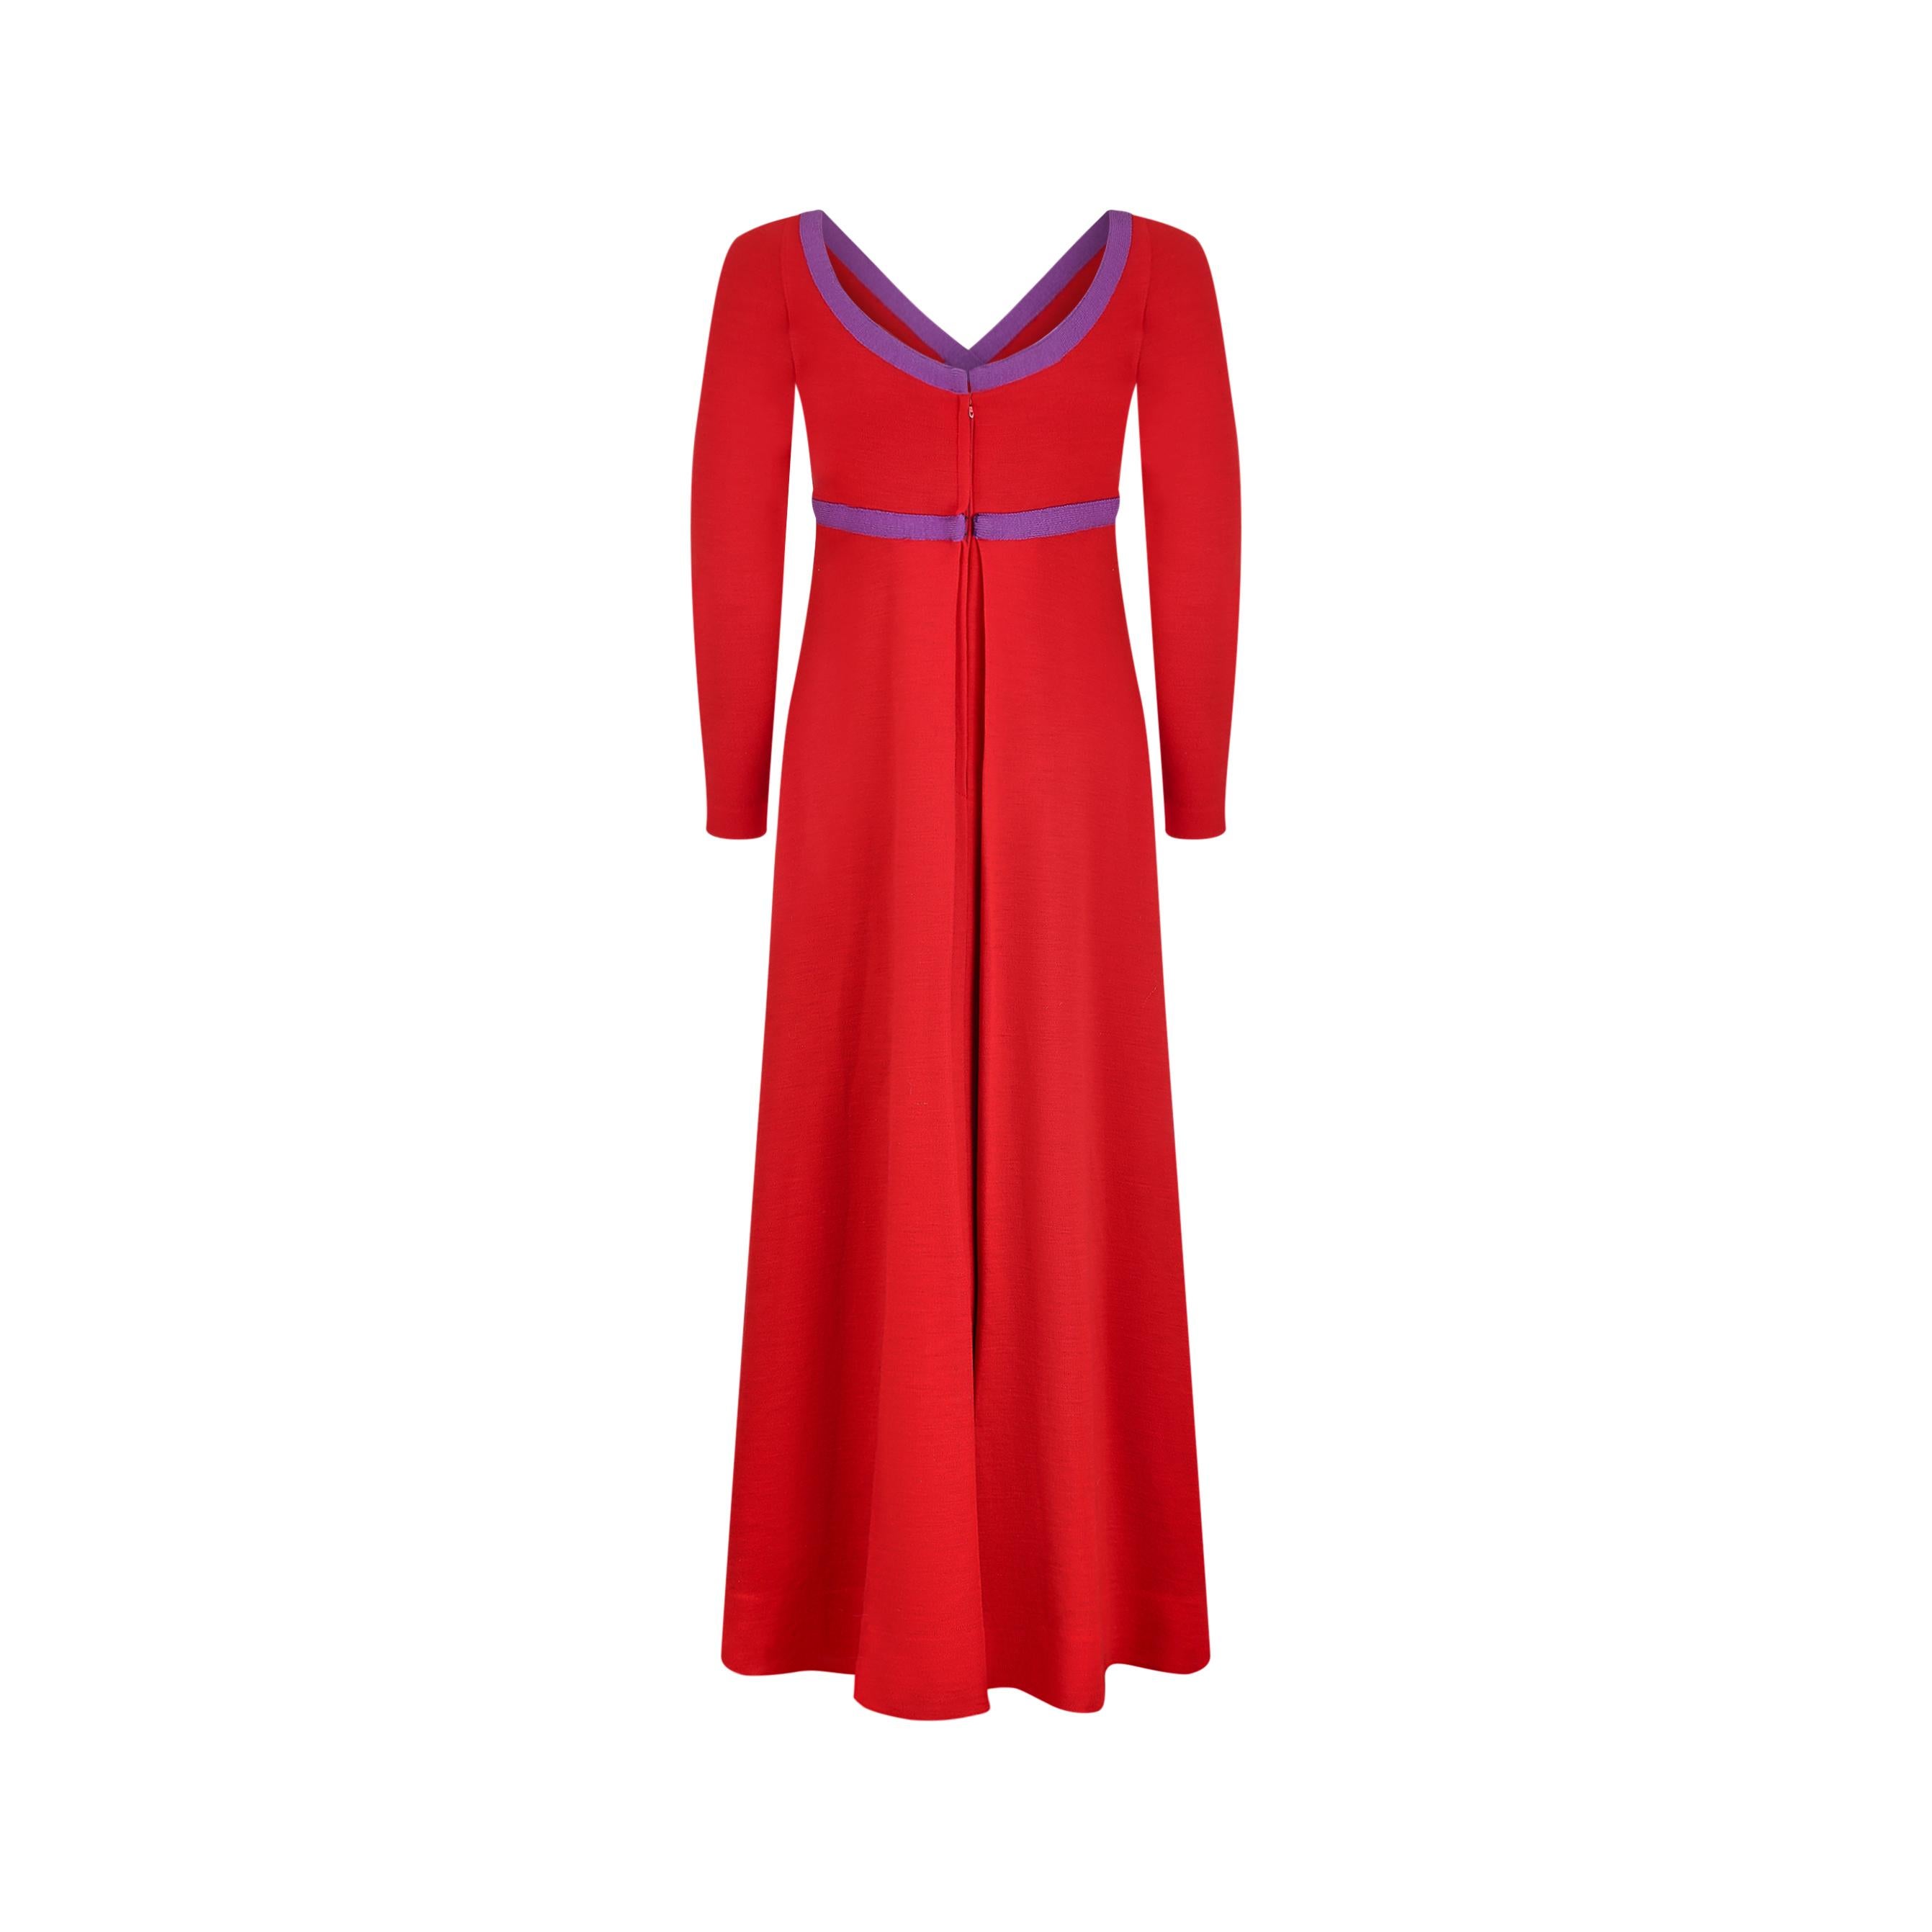 1969 Rudi Gernreich Red and Purple Wool Maxi Dress In Excellent Condition For Sale In London, GB